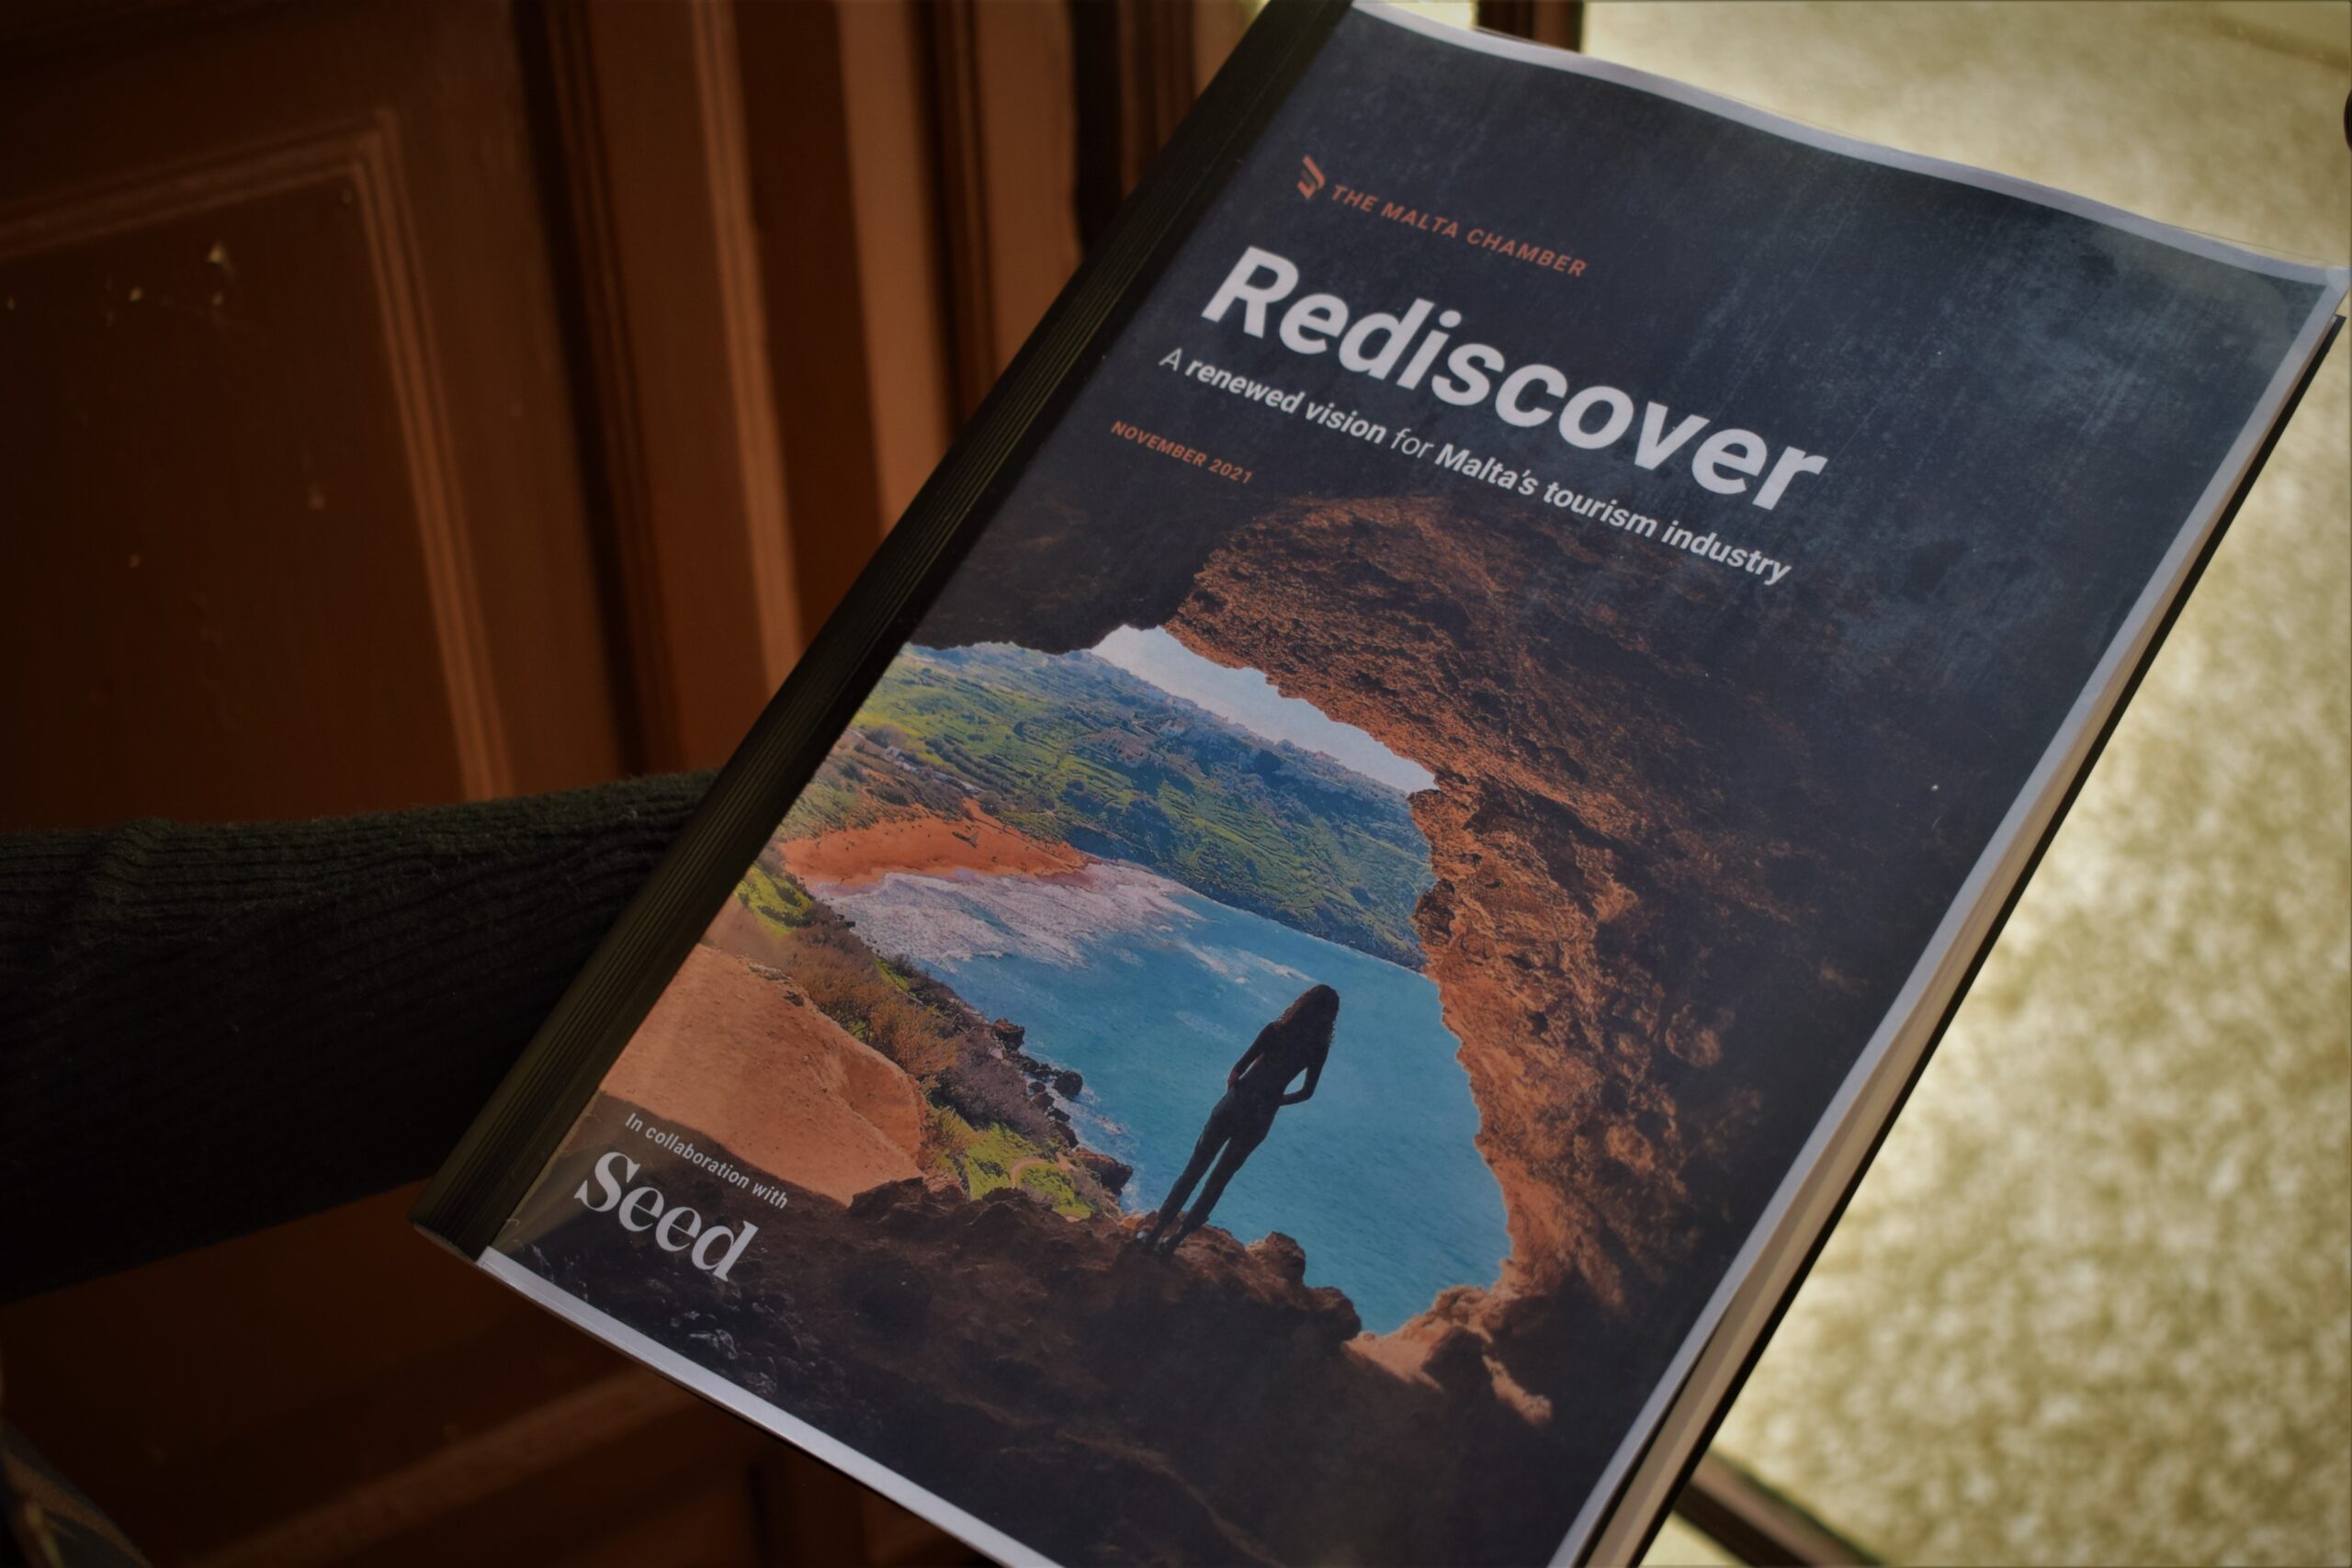 The Malta Chamber launches Rediscover – A New Vision for the Tourism Industry in Malta